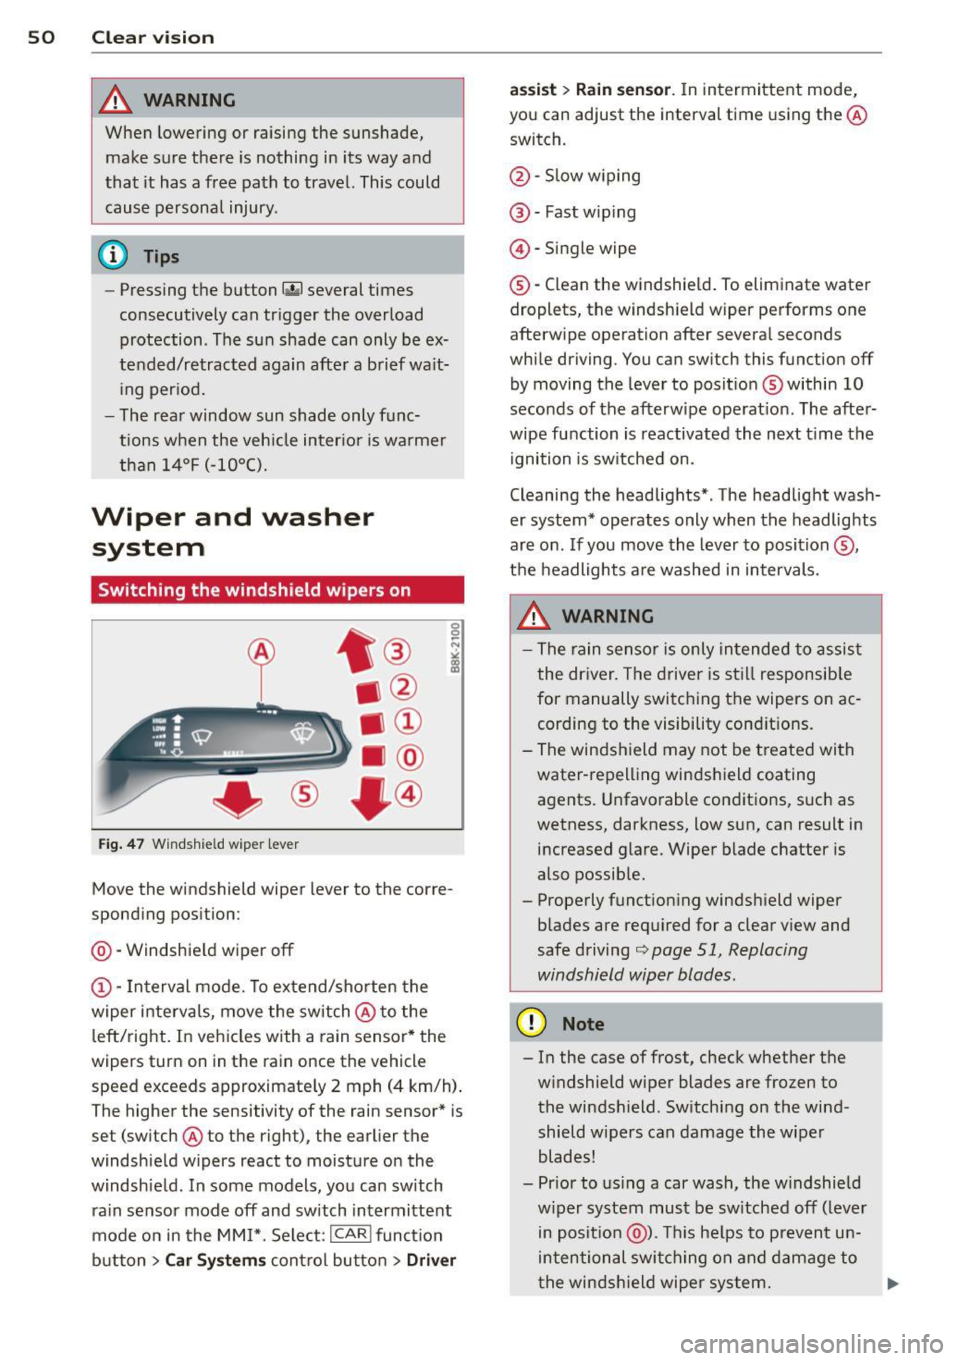 AUDI S4 SEDAN 2013  Owners Manual 50  Clear vis ion 
& WARNING 
When  lowering  or  raising  the  sunshade, 
make sure there  is nothing  in  its  way and 
that  it  has a free  path  to  travel.  This could 
cause personal  injury . 